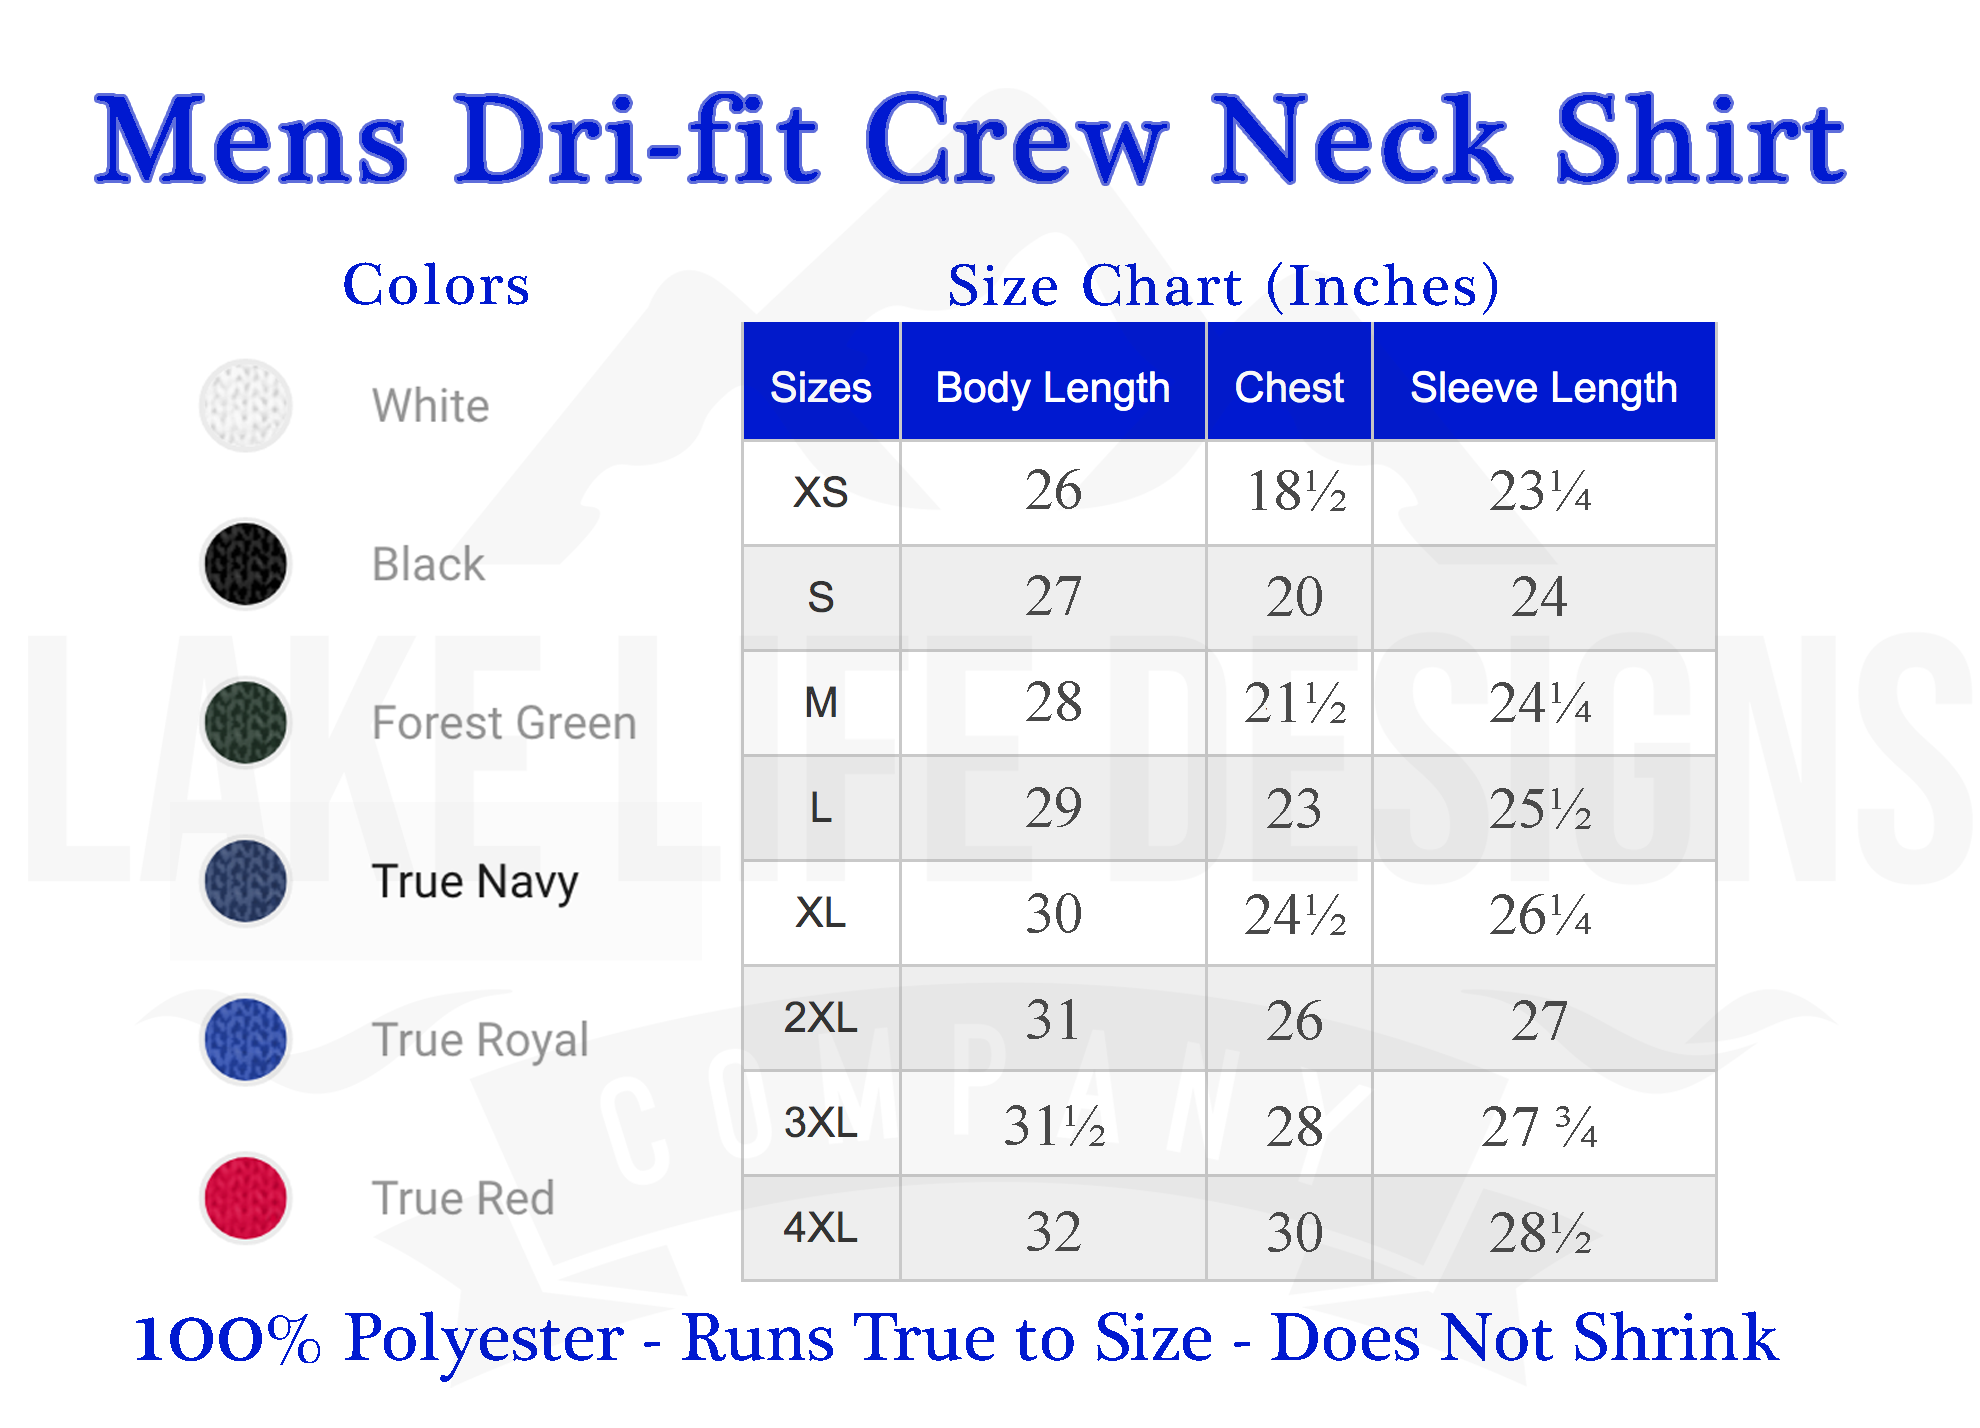 Percy Priest Lake Life Dri-fit Boating Shirt - Breathable Material- Men's Long Sleeve Moisture Wicking Tee - Tennessee Lake